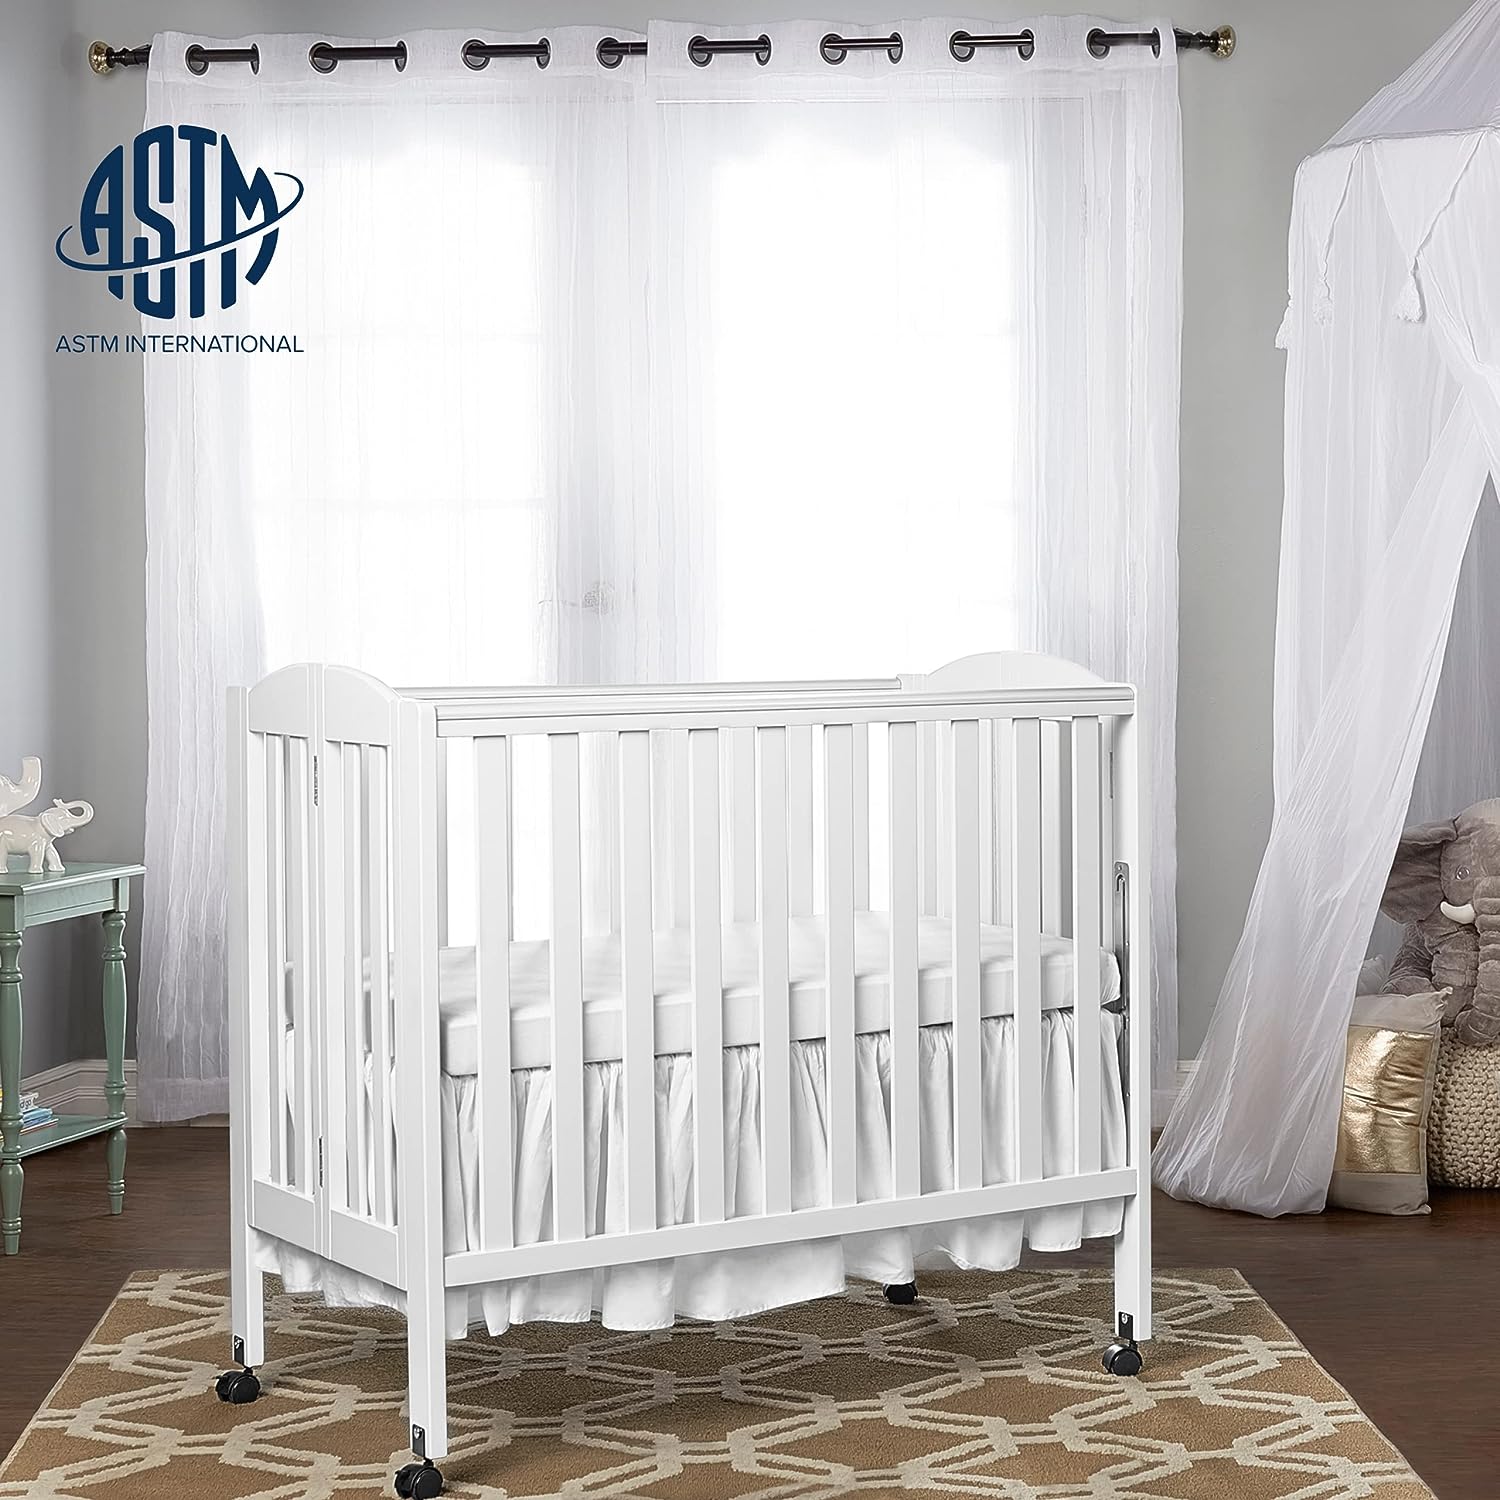 Dream On Me 3 in 1 Portable Folding Stationary Side Crib in White - $100